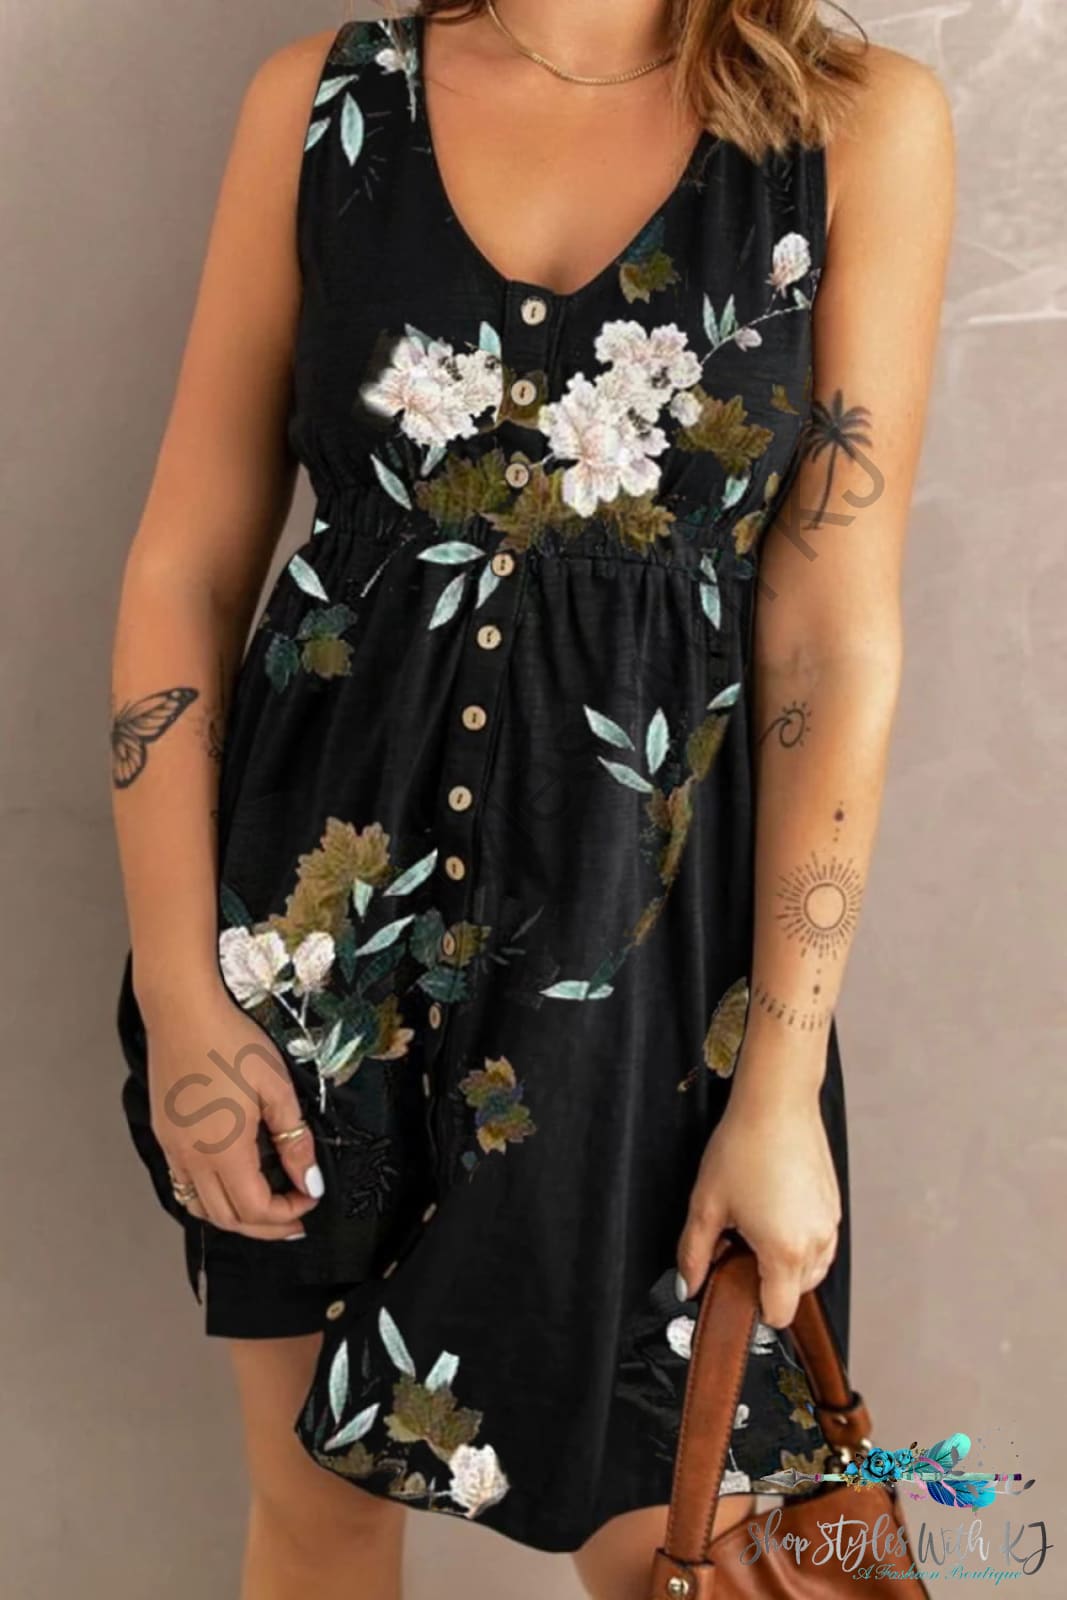 Printed Scoop Neck Sleeveless Buttoned Magic Dress Dresses